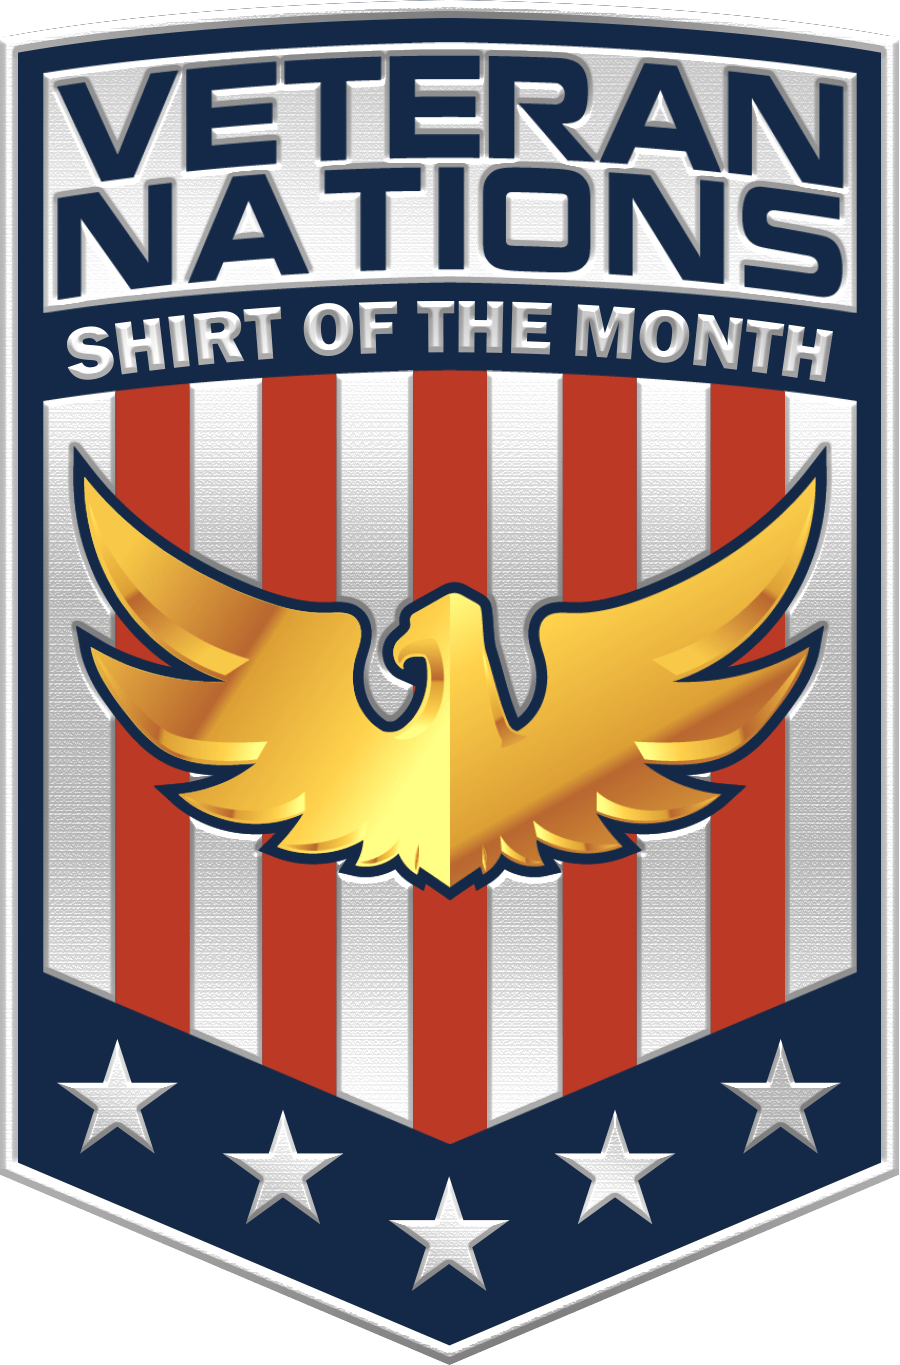 VeteranNations Shirt Of The Month: Annual Plan-Subscription-Veterans Nation